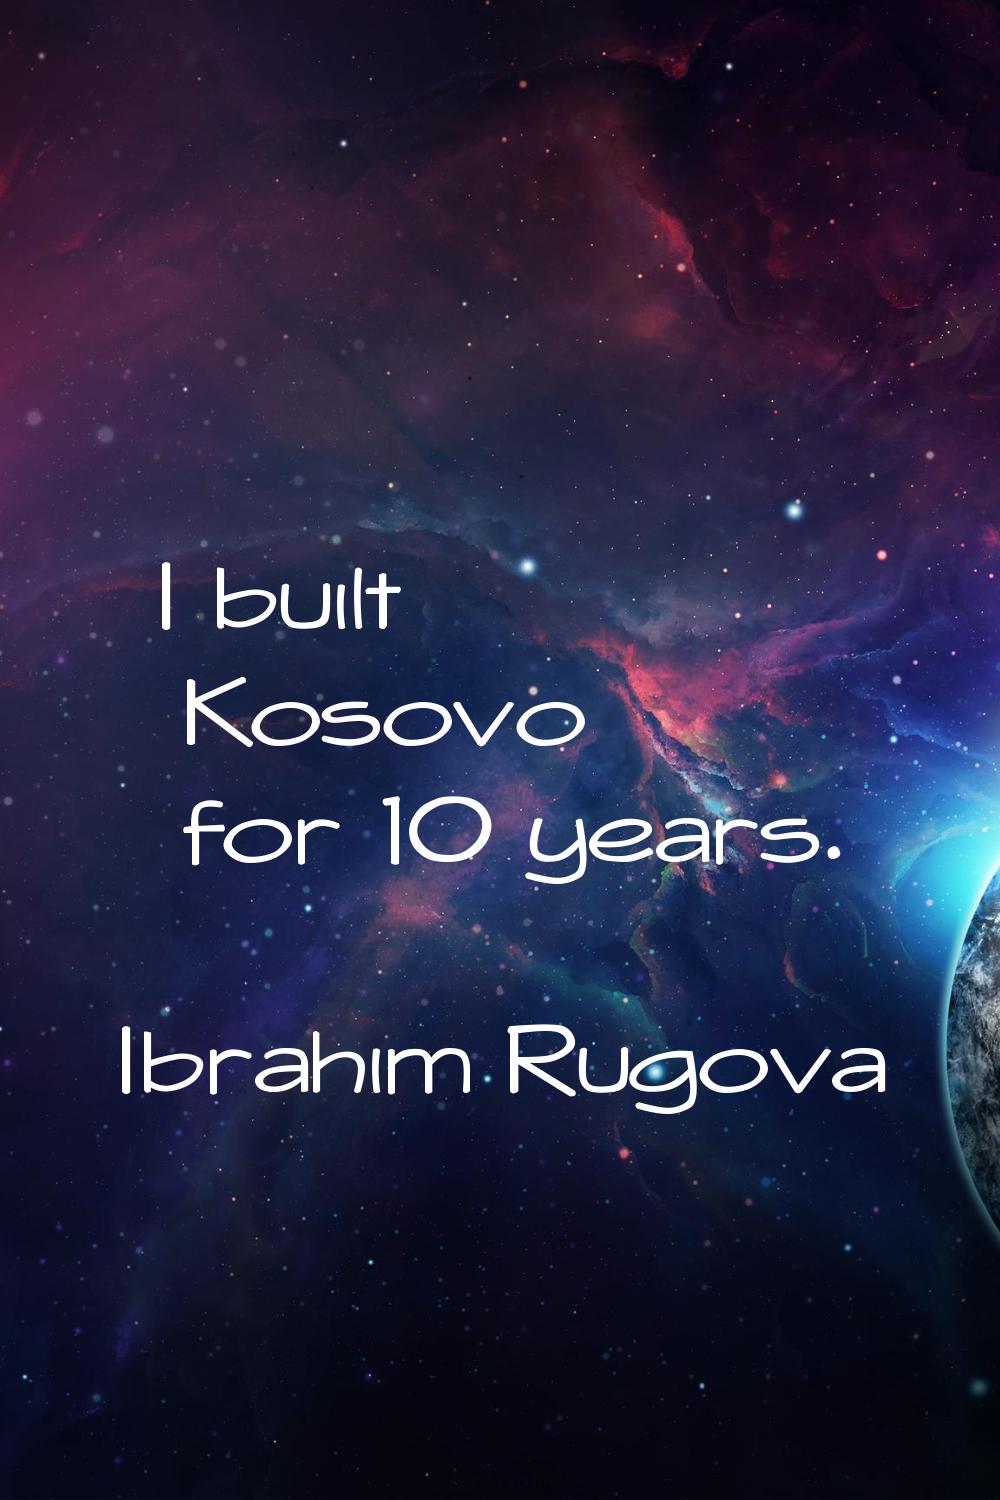 I built Kosovo for 10 years.